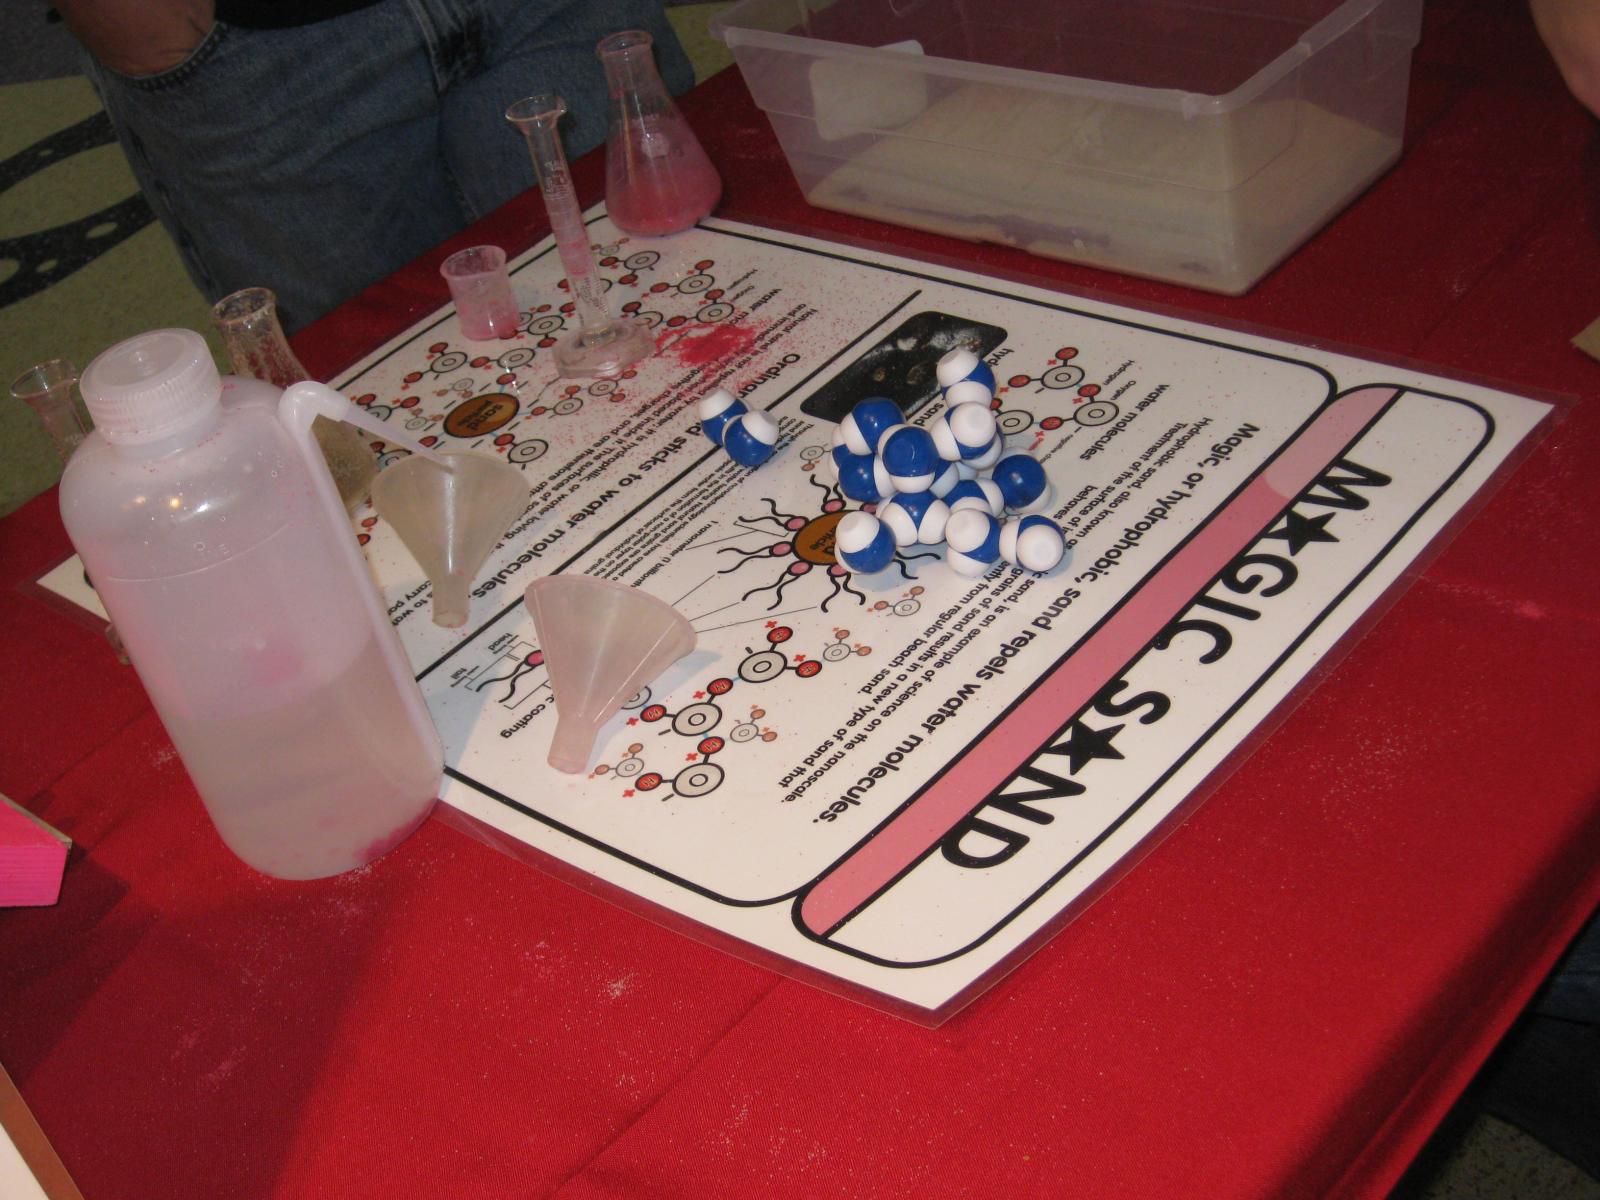 Activity materials on a table including magic sand, water, and an information sign